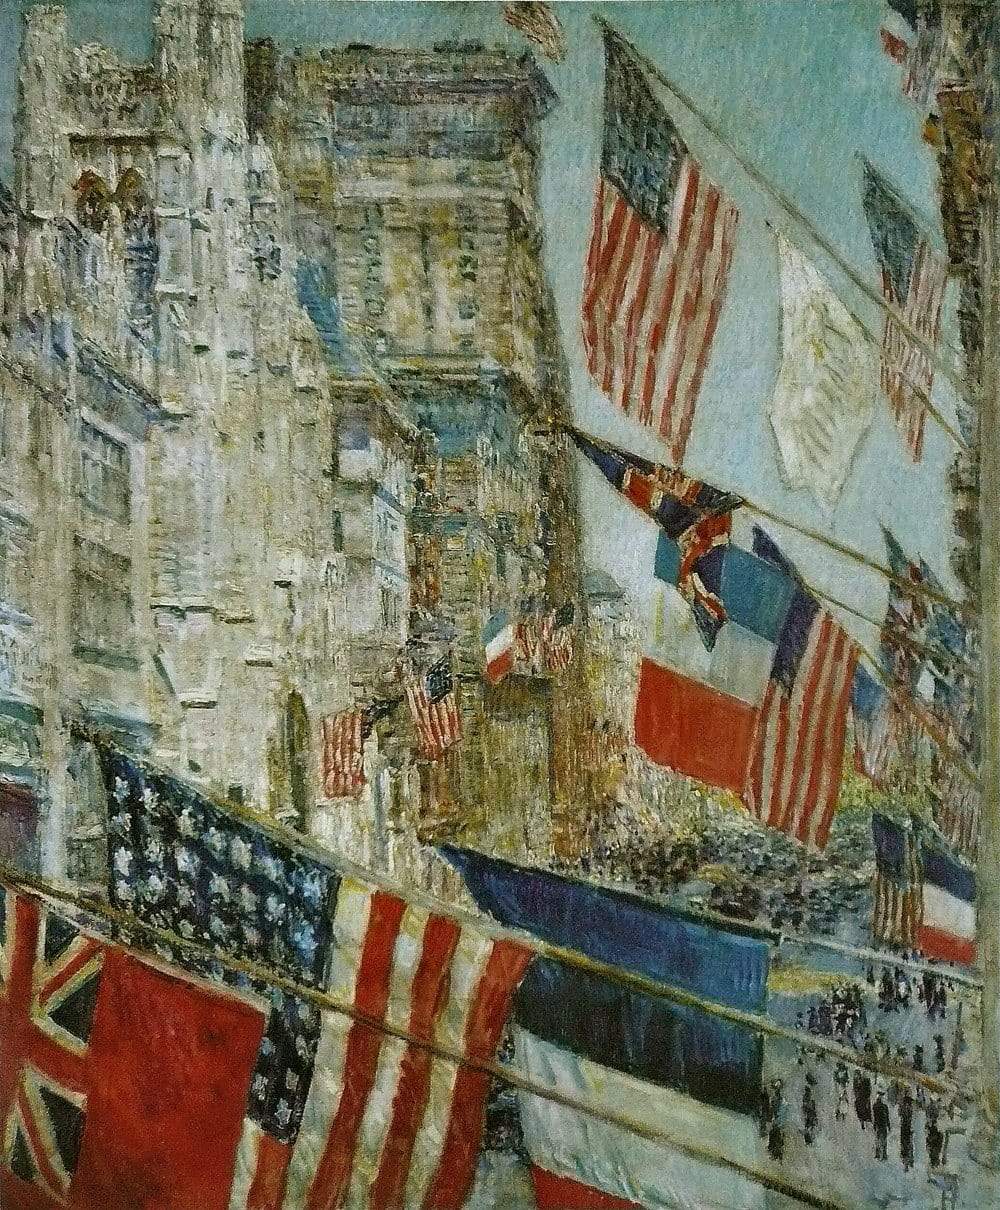 Allies Day by Childe Hassam 1917